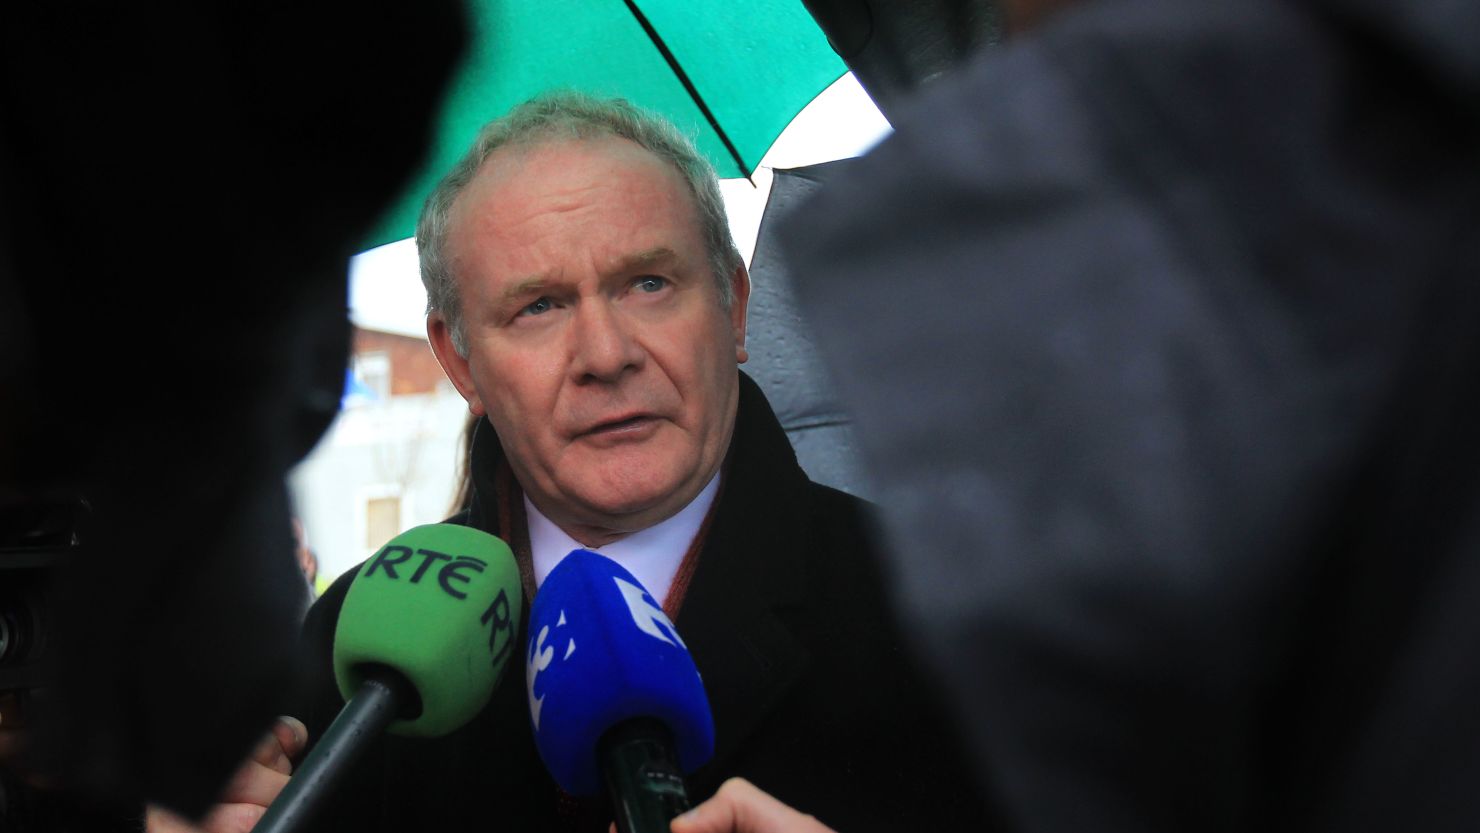 Martin McGuinness, once with the IRA, stepped down as Northern Ireland's deputy first minister.